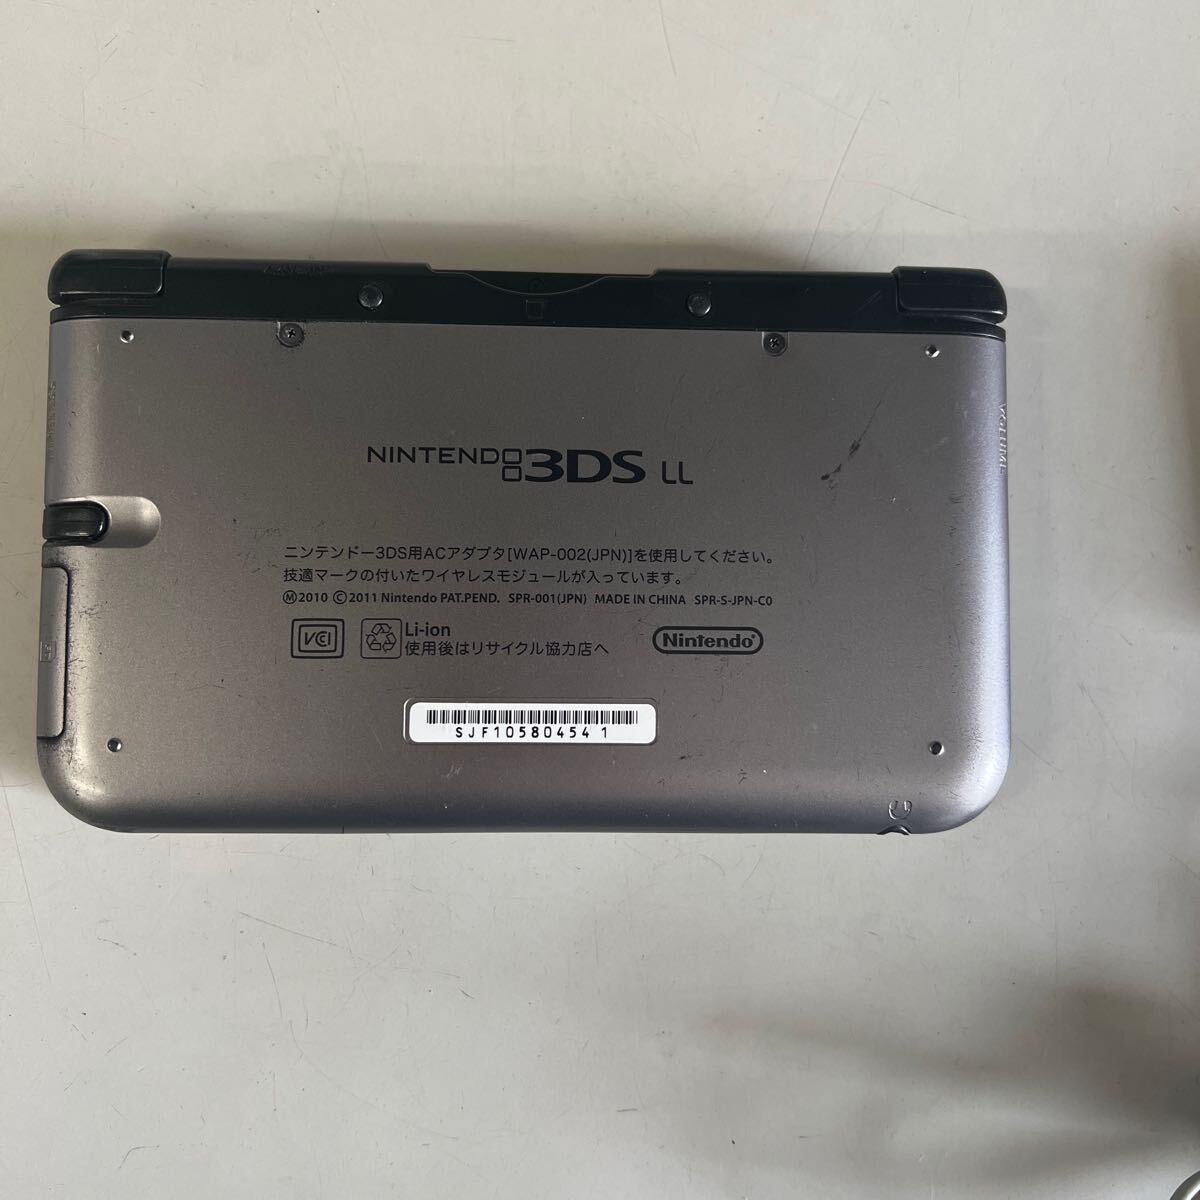  Nintendo nintendo 3DSLL body the first period . operation goods 